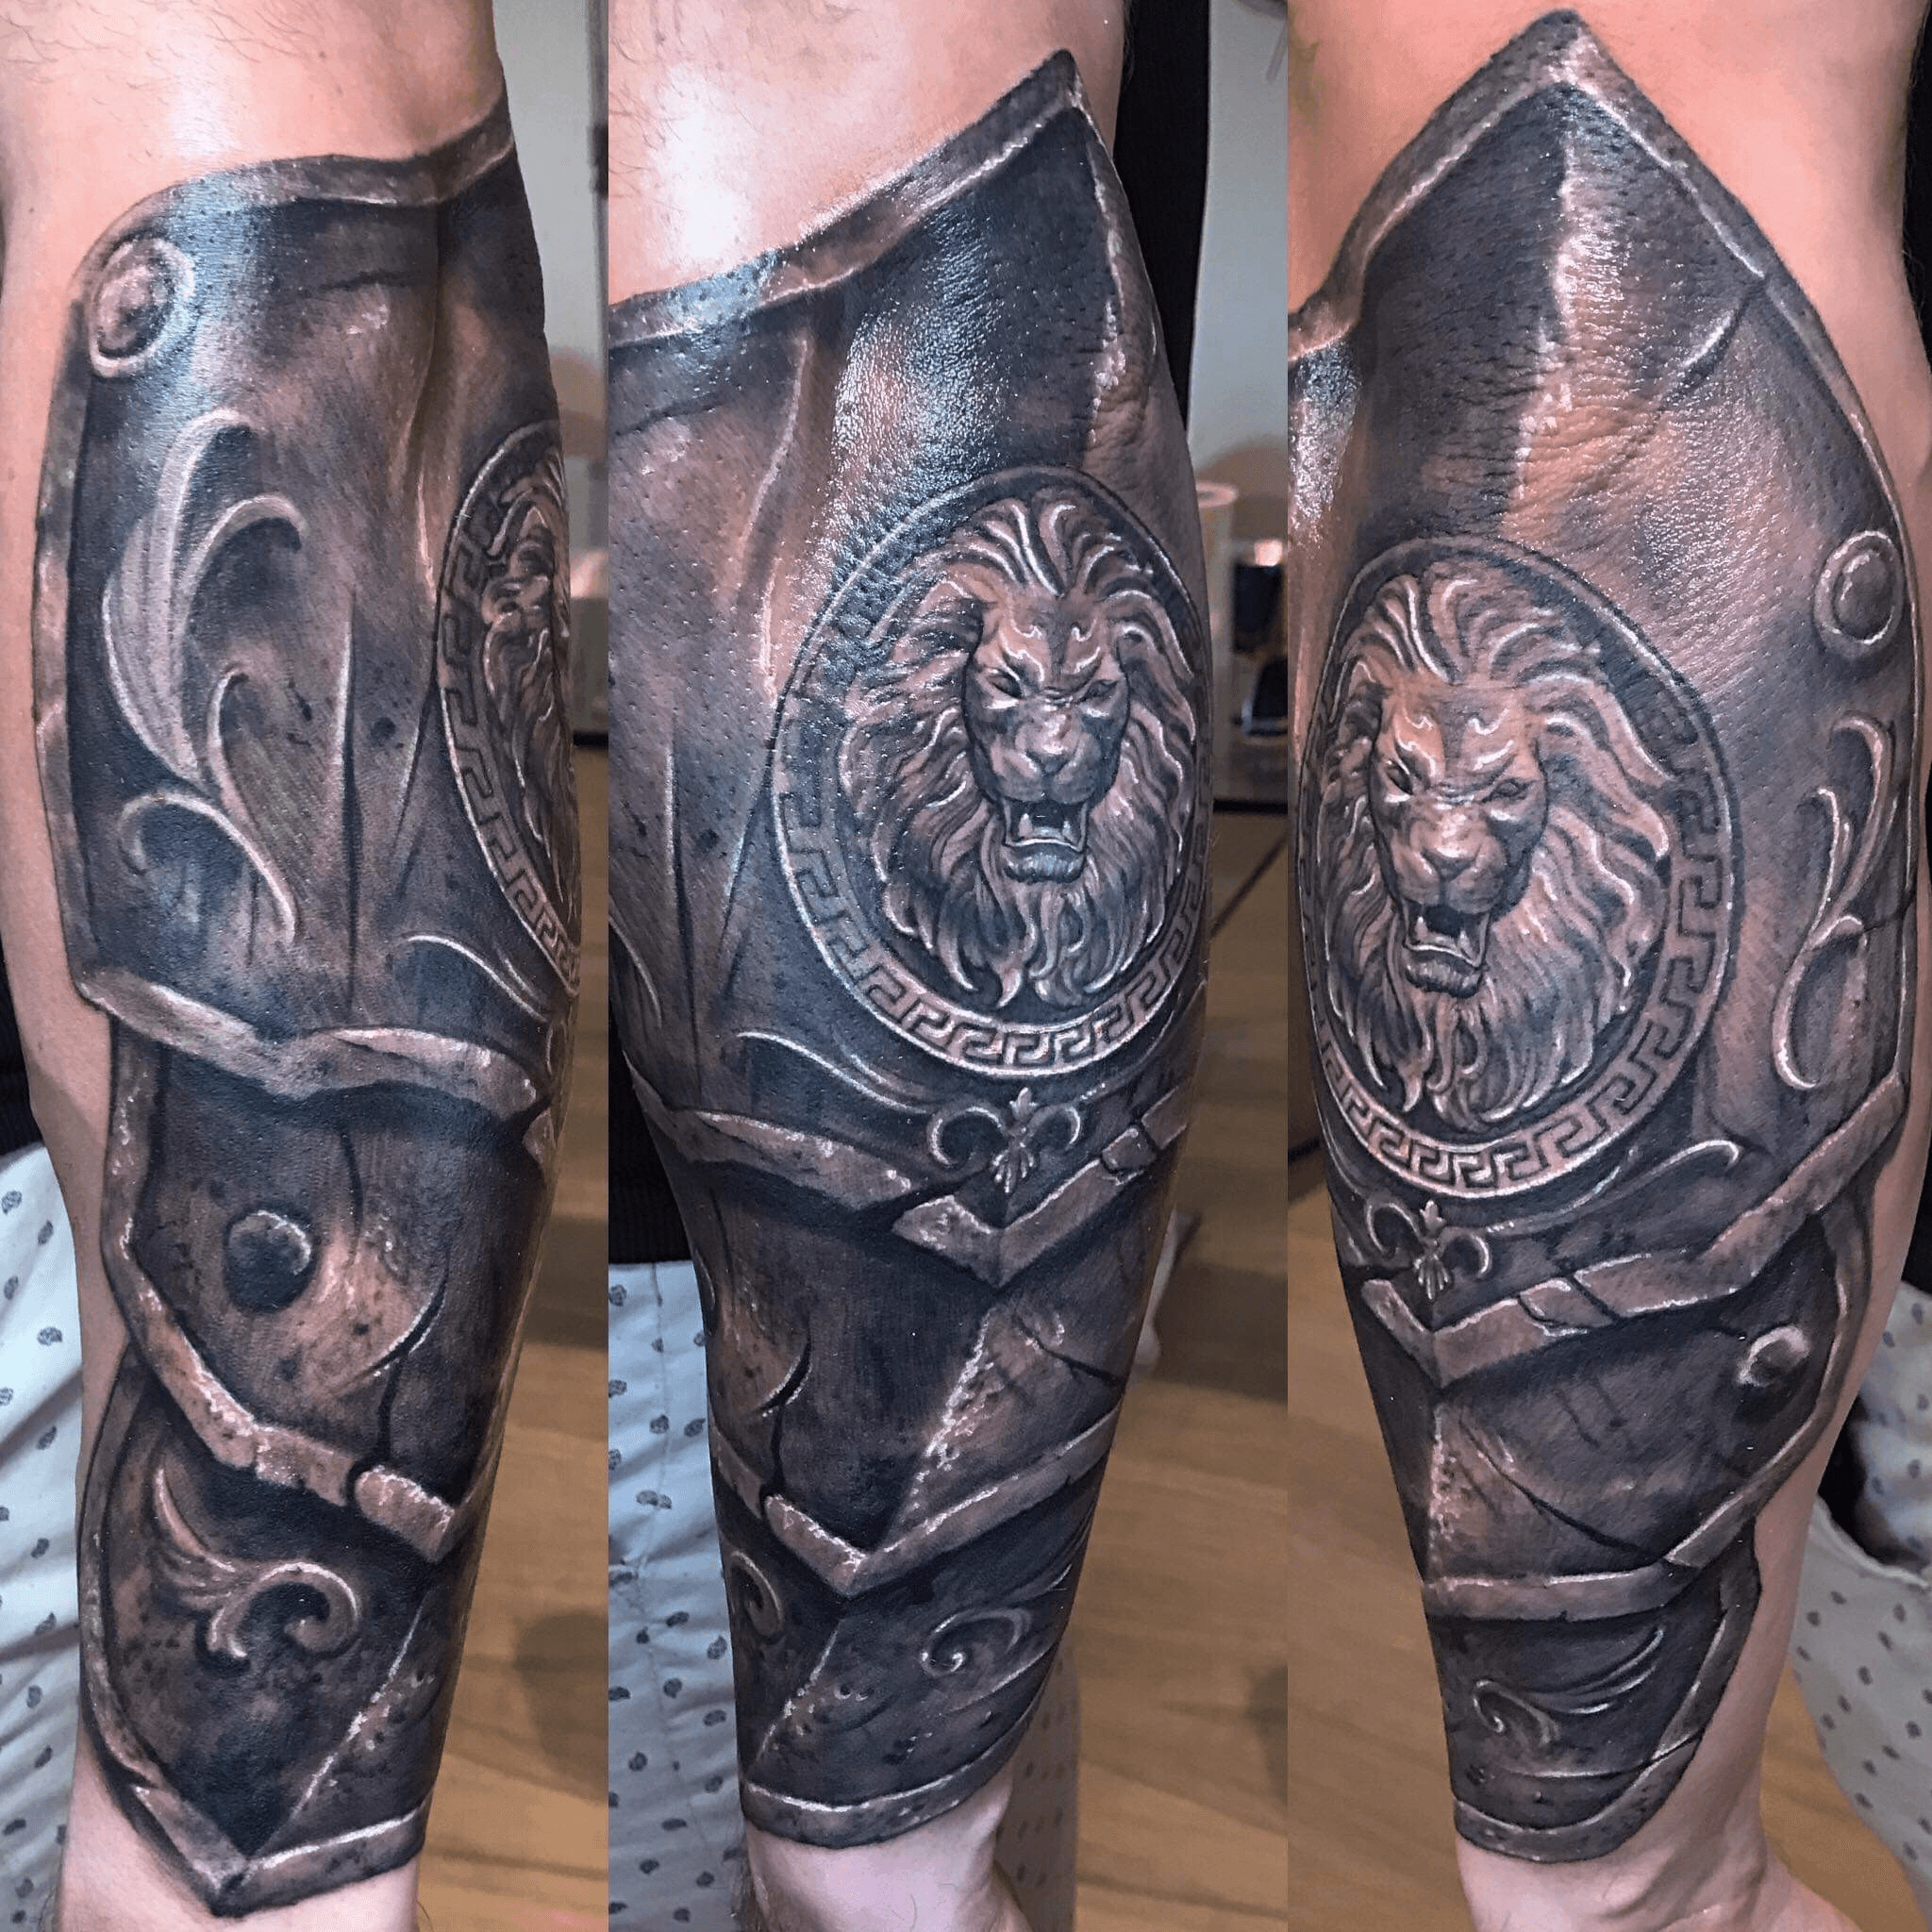 Tattoo uploaded by CruzInk • A bit of armour work on this badass dude  ..thanks again for giving me artistic freedom to come up with this and  looking forward to the next